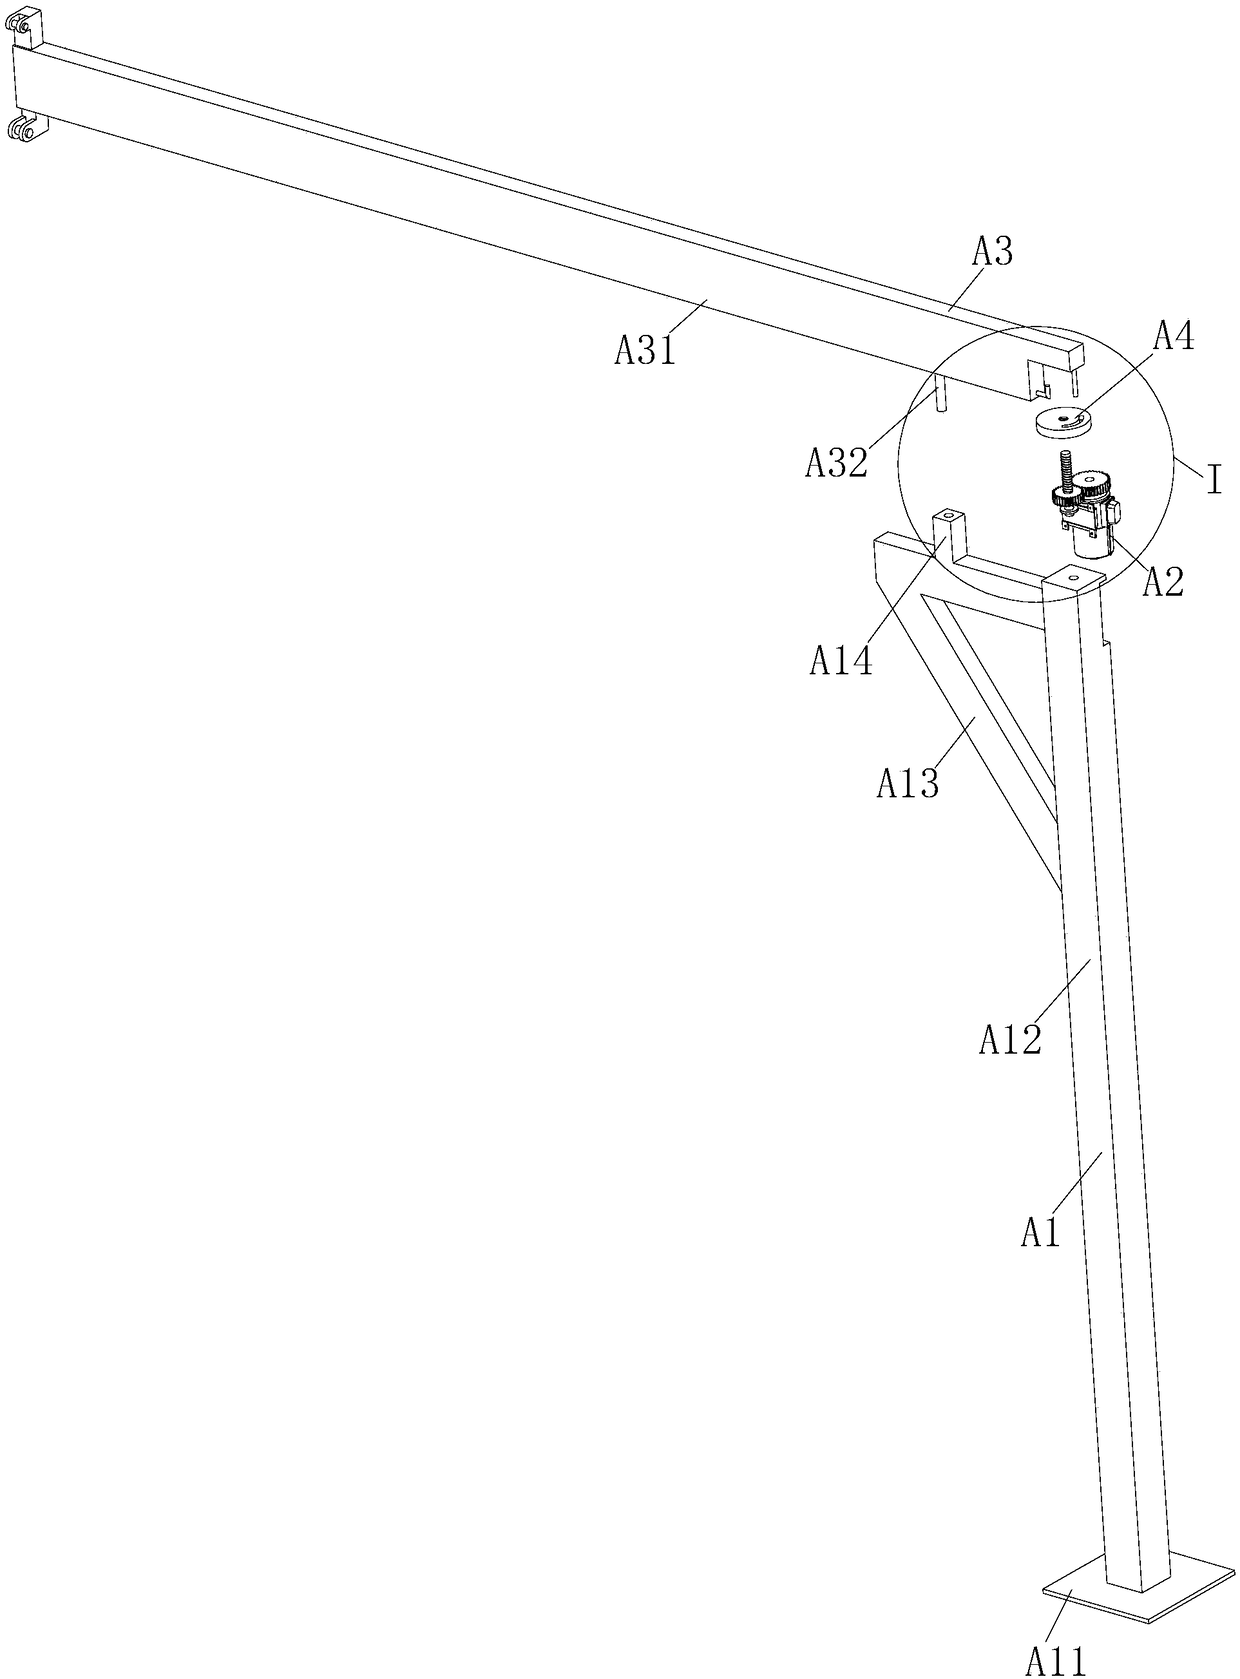 Water tank hoisting device and method